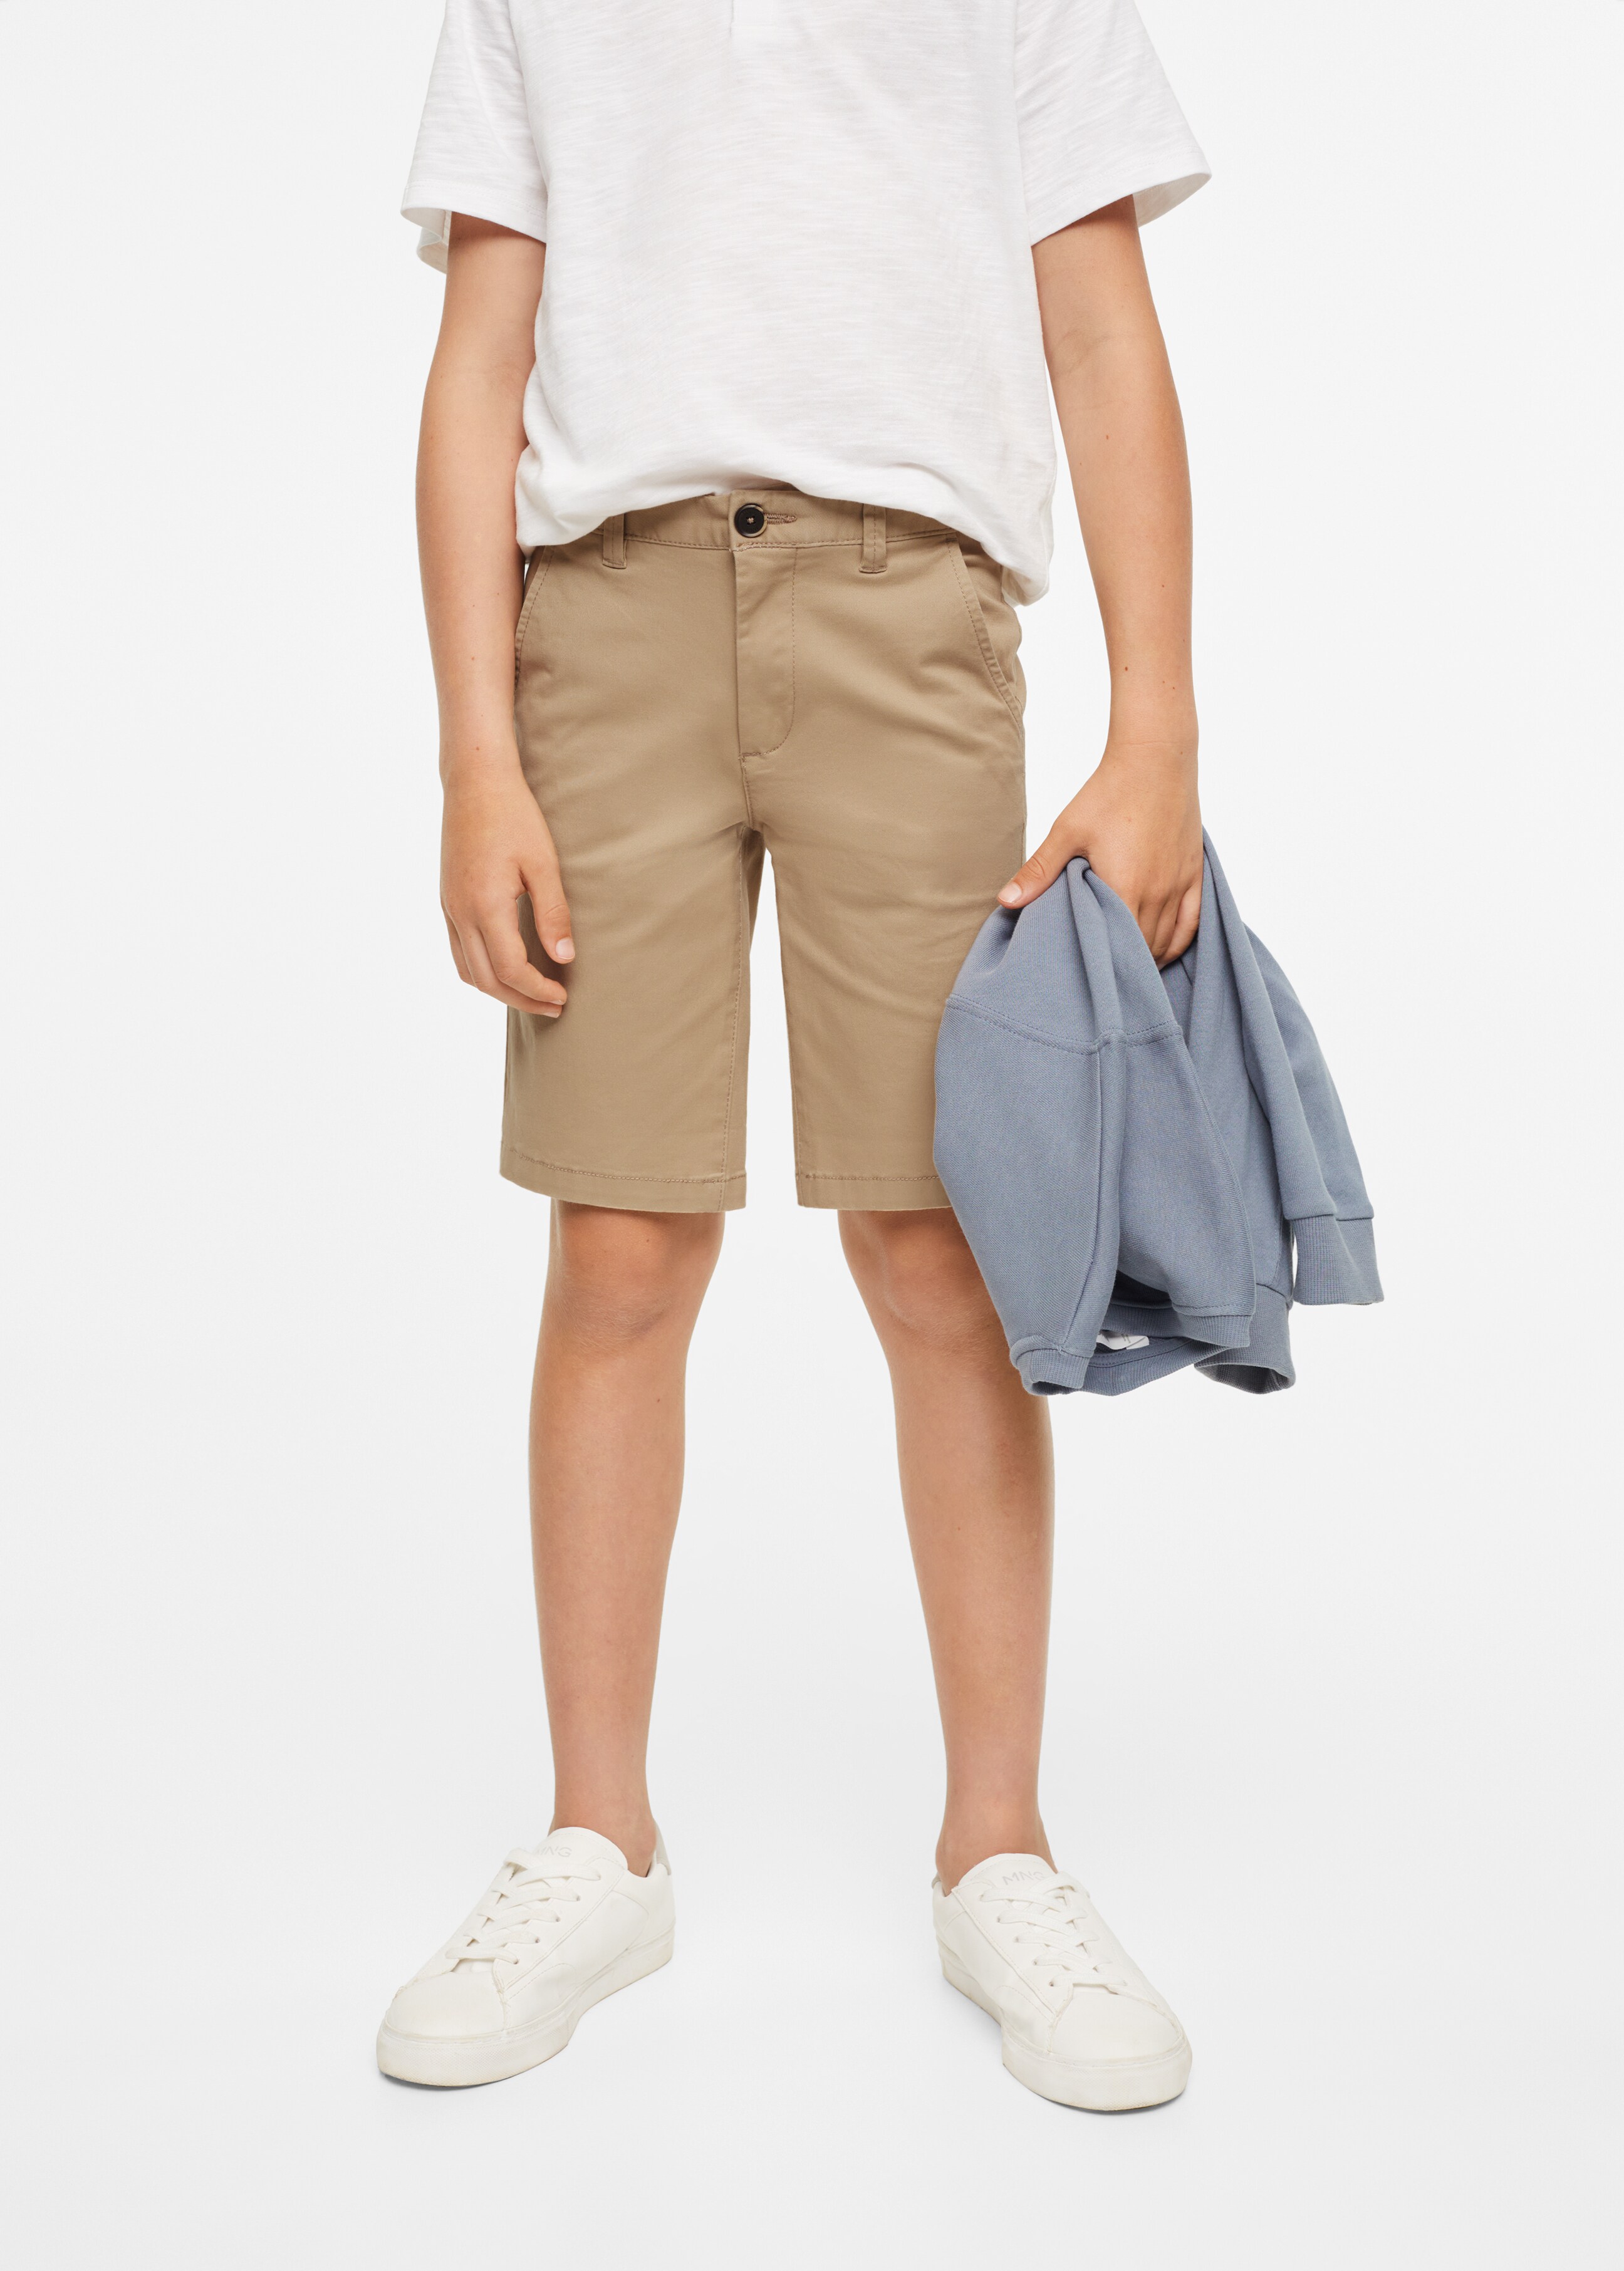 Cotton Bermuda shorts - Details of the article 1